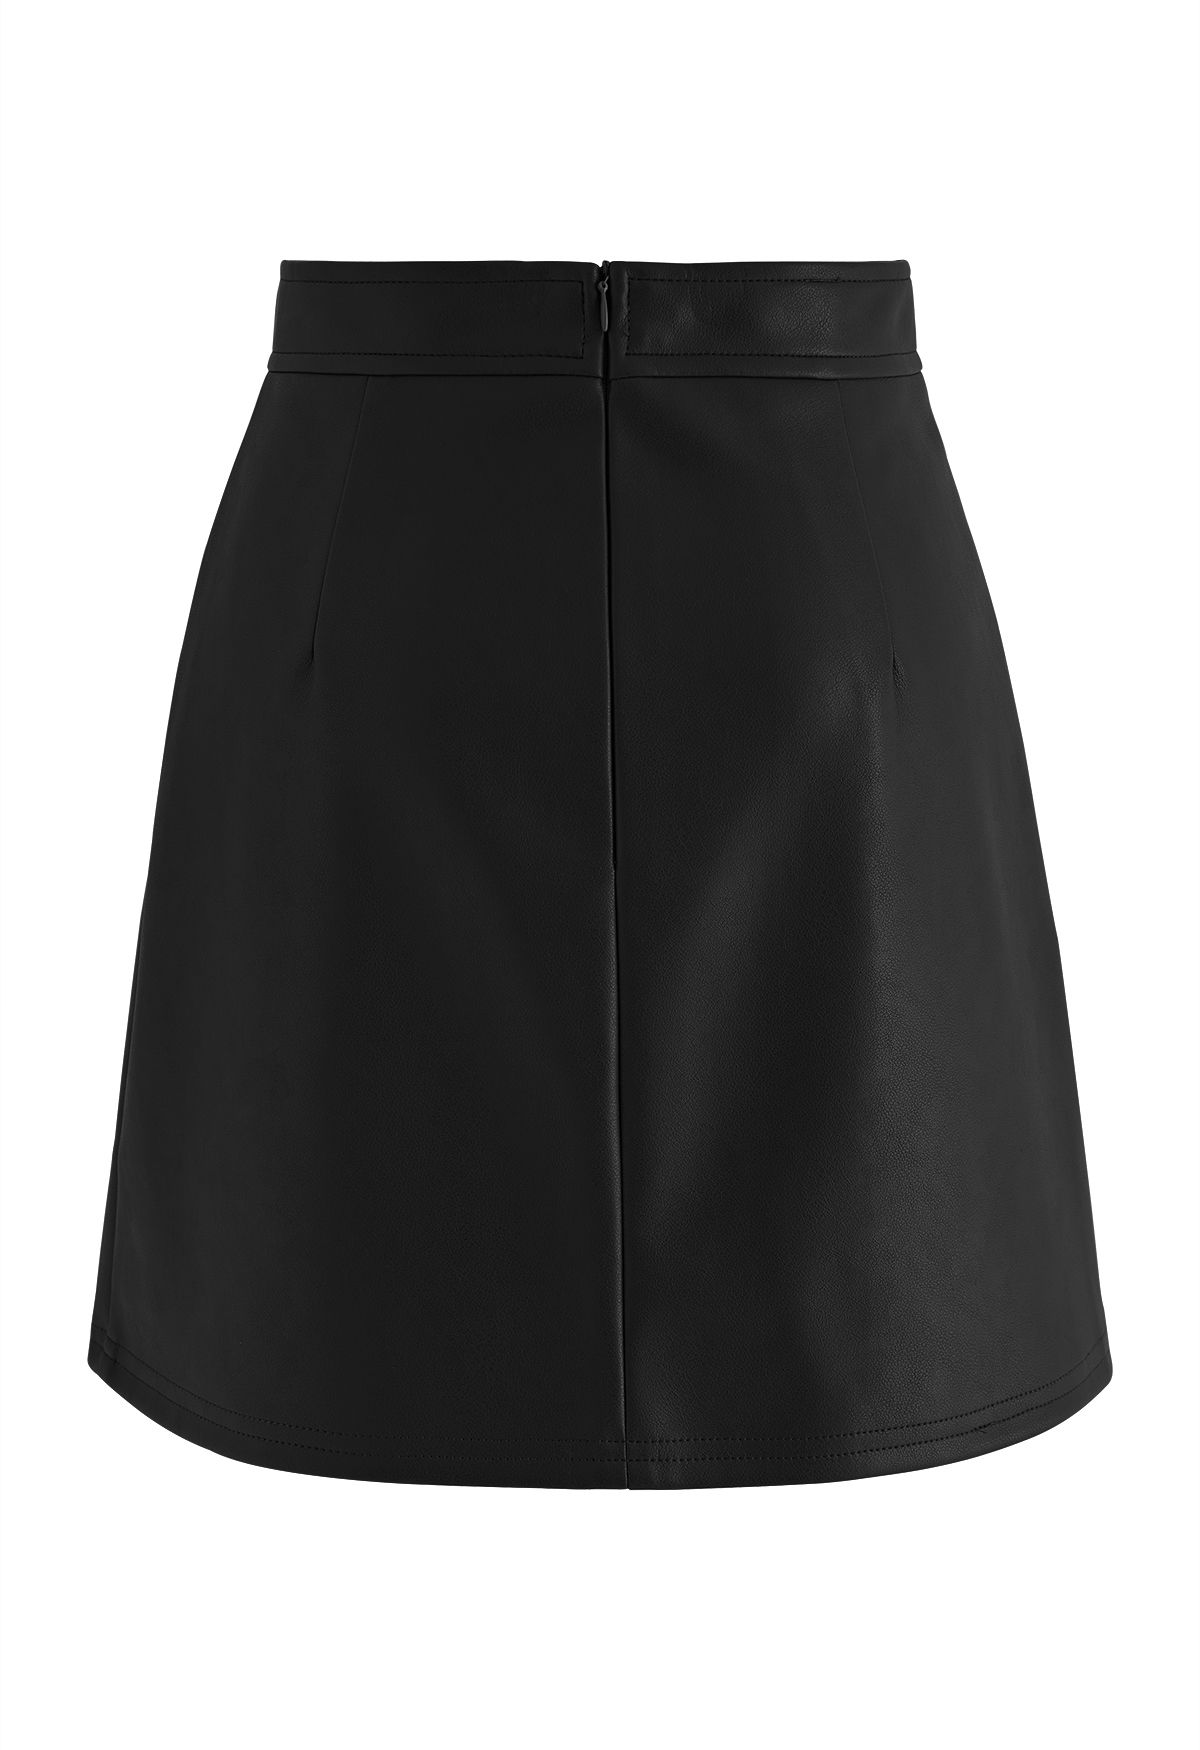 Nifty Faux Leather Flap Mini Bud Skirt in Black - Retro, Indie and ...